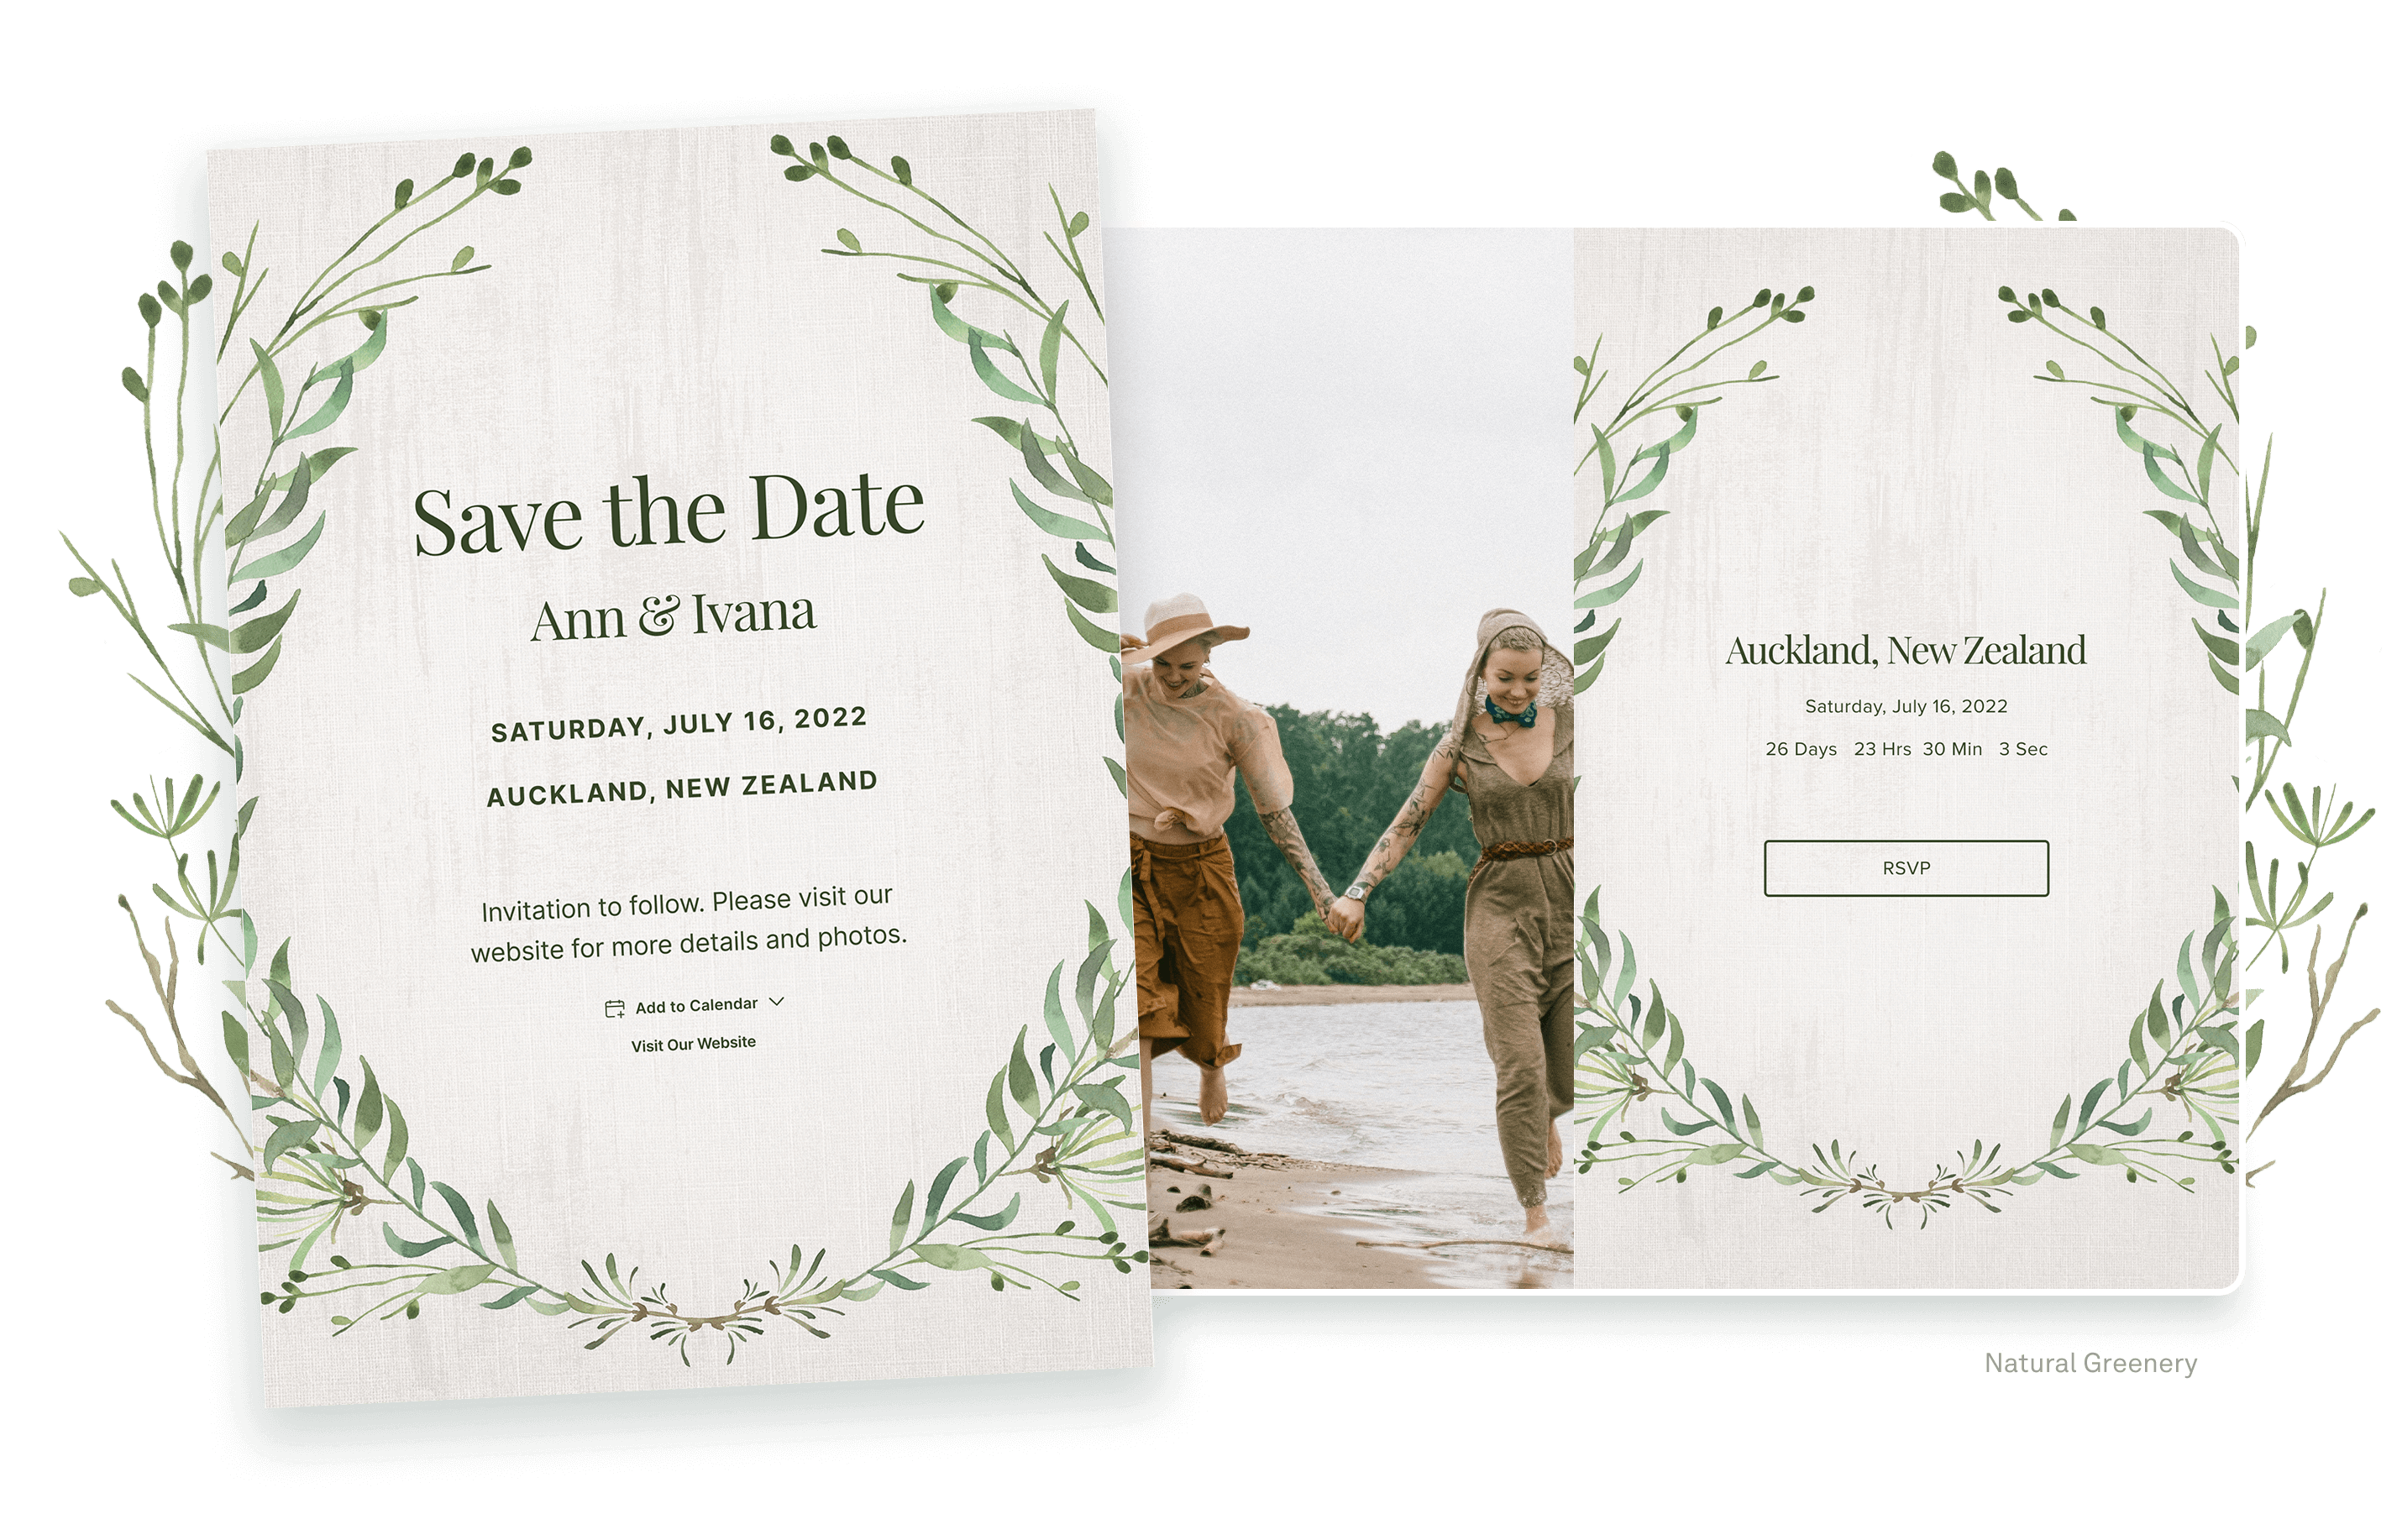 Save the date stationery samples